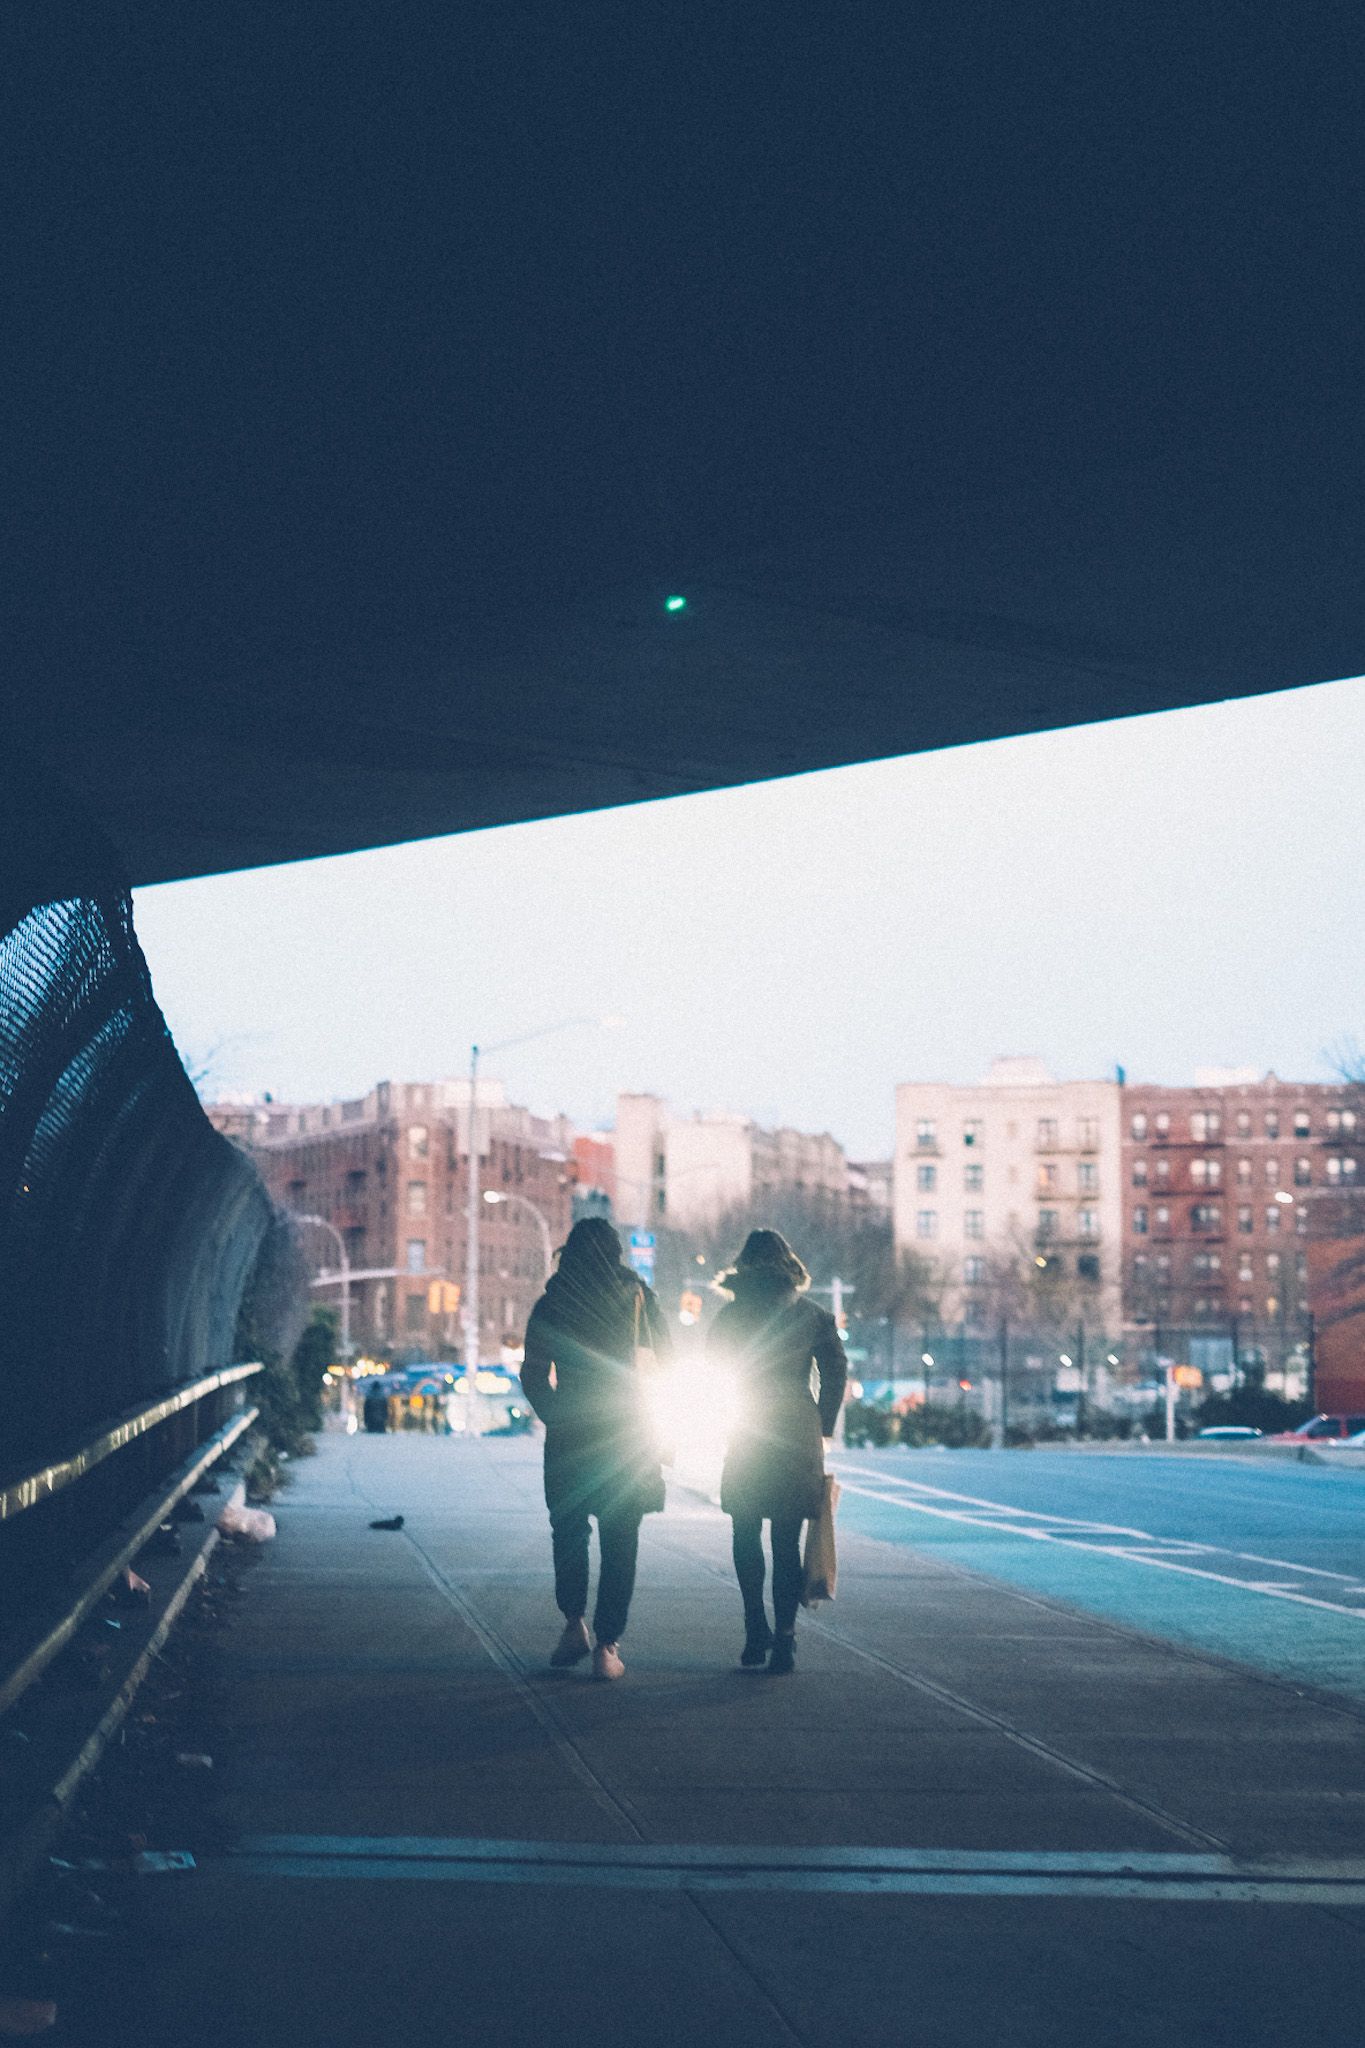 Two people walk under an overpass at dusk, a car headlight passing in the space between them.